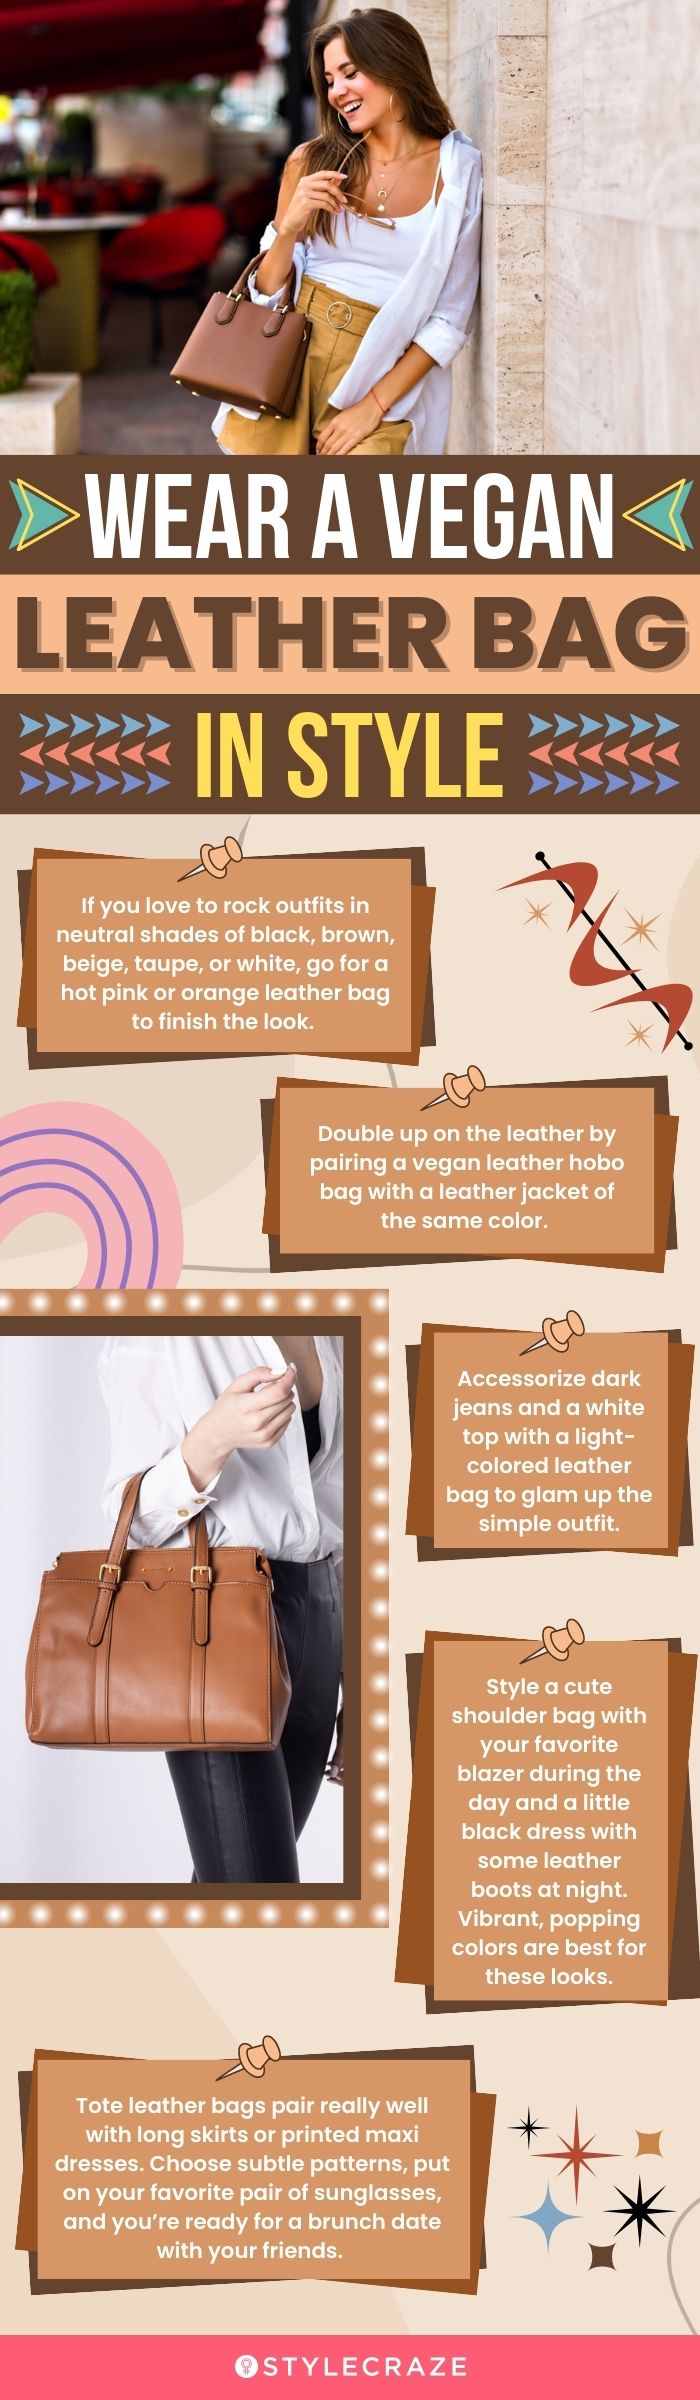 Wear A Vegan Leather Bag With Style (infographic)